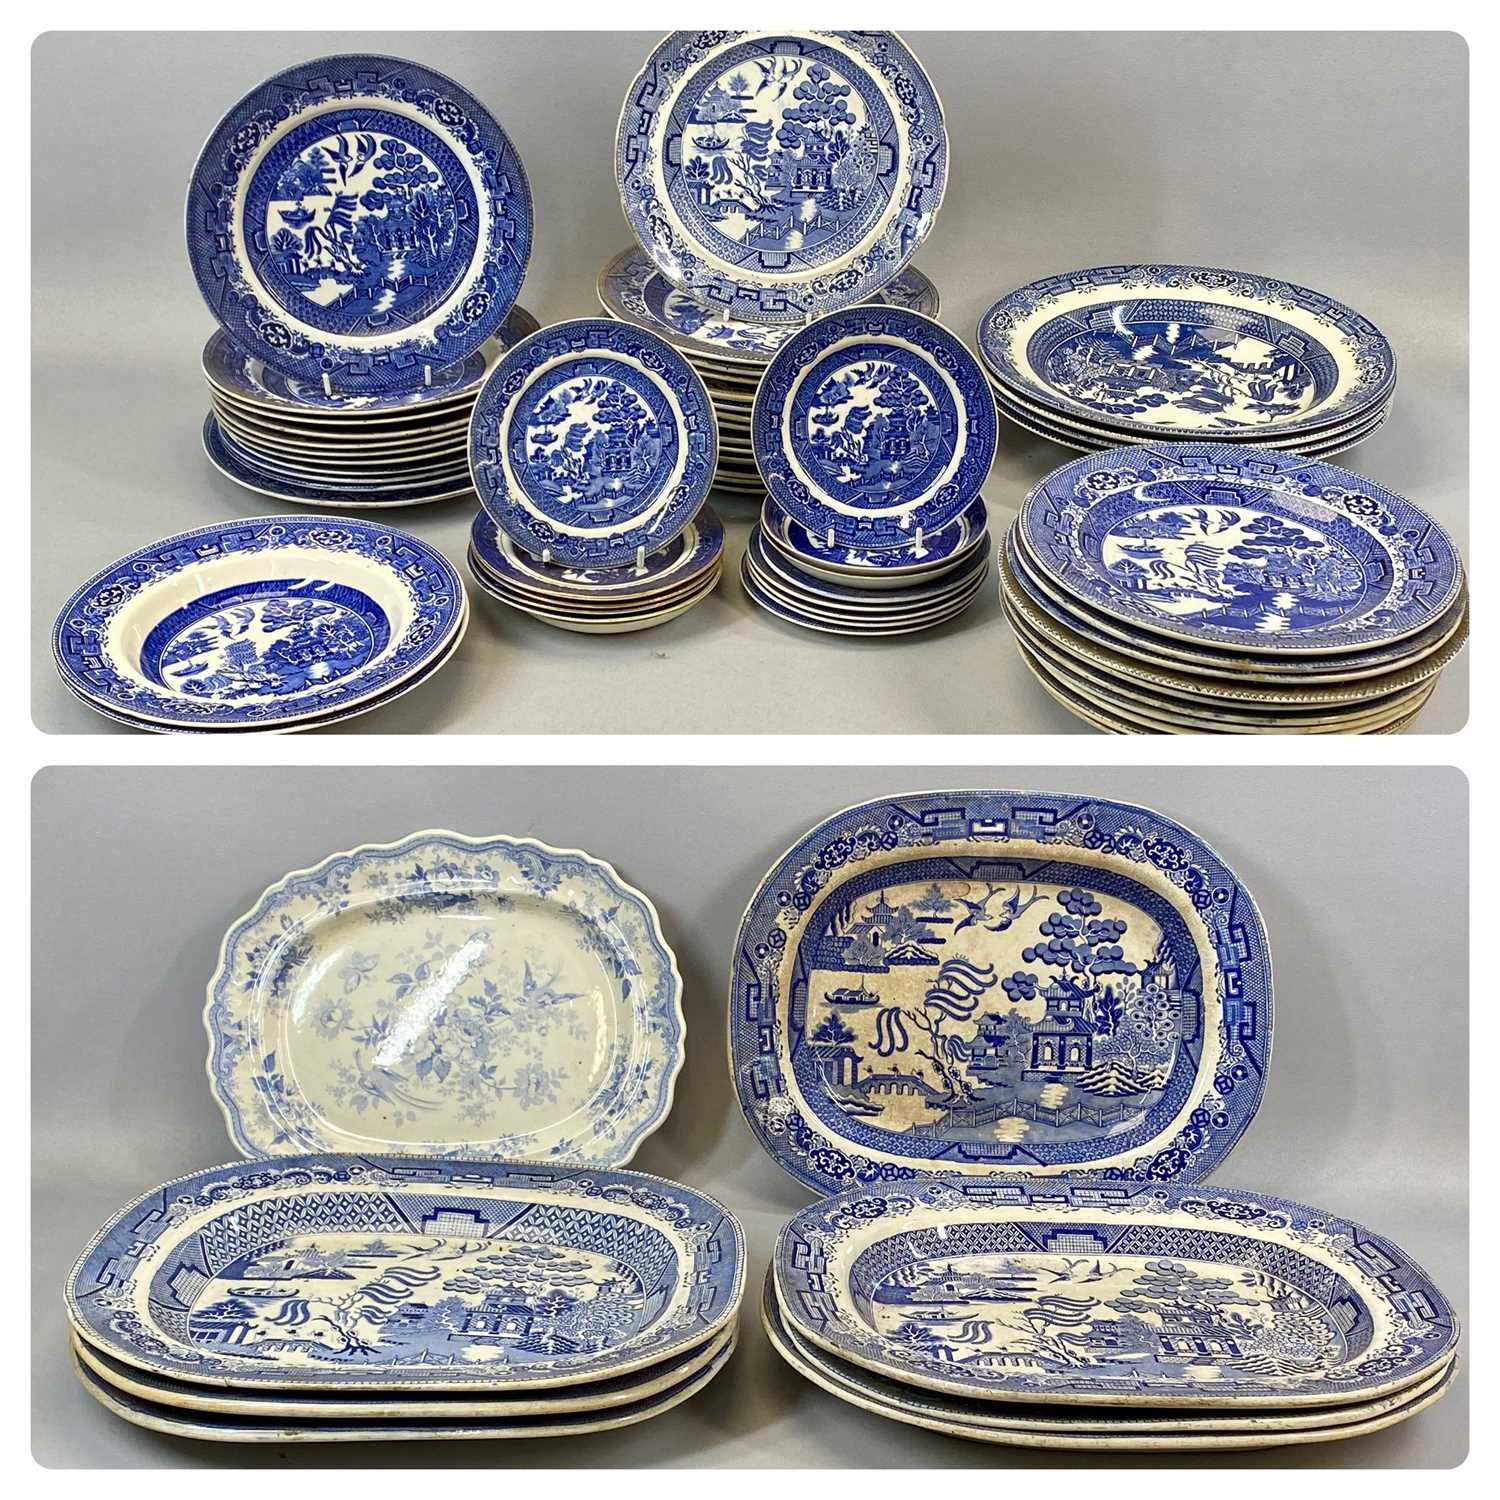 LARGE GROUP OF 19TH CENTURY STAFFORDSHIRE BLUE & WHITE WILLOW PATTERN TABLEWARE, including seven